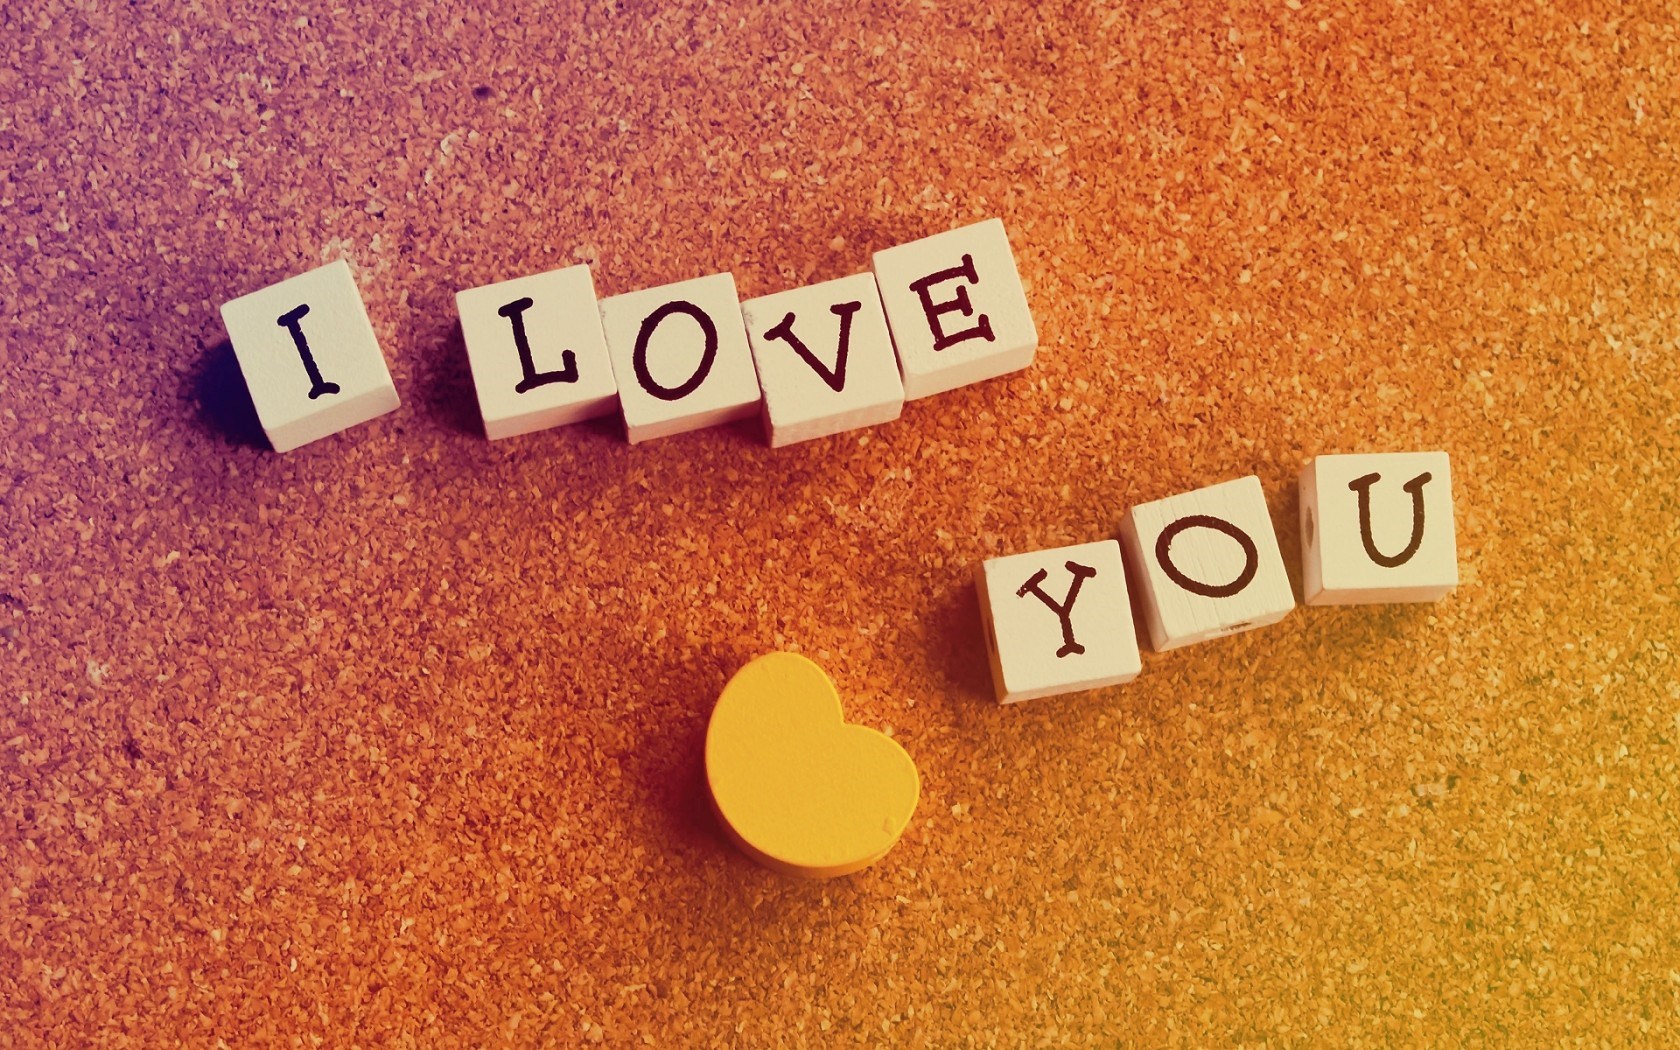 I love you - picture.